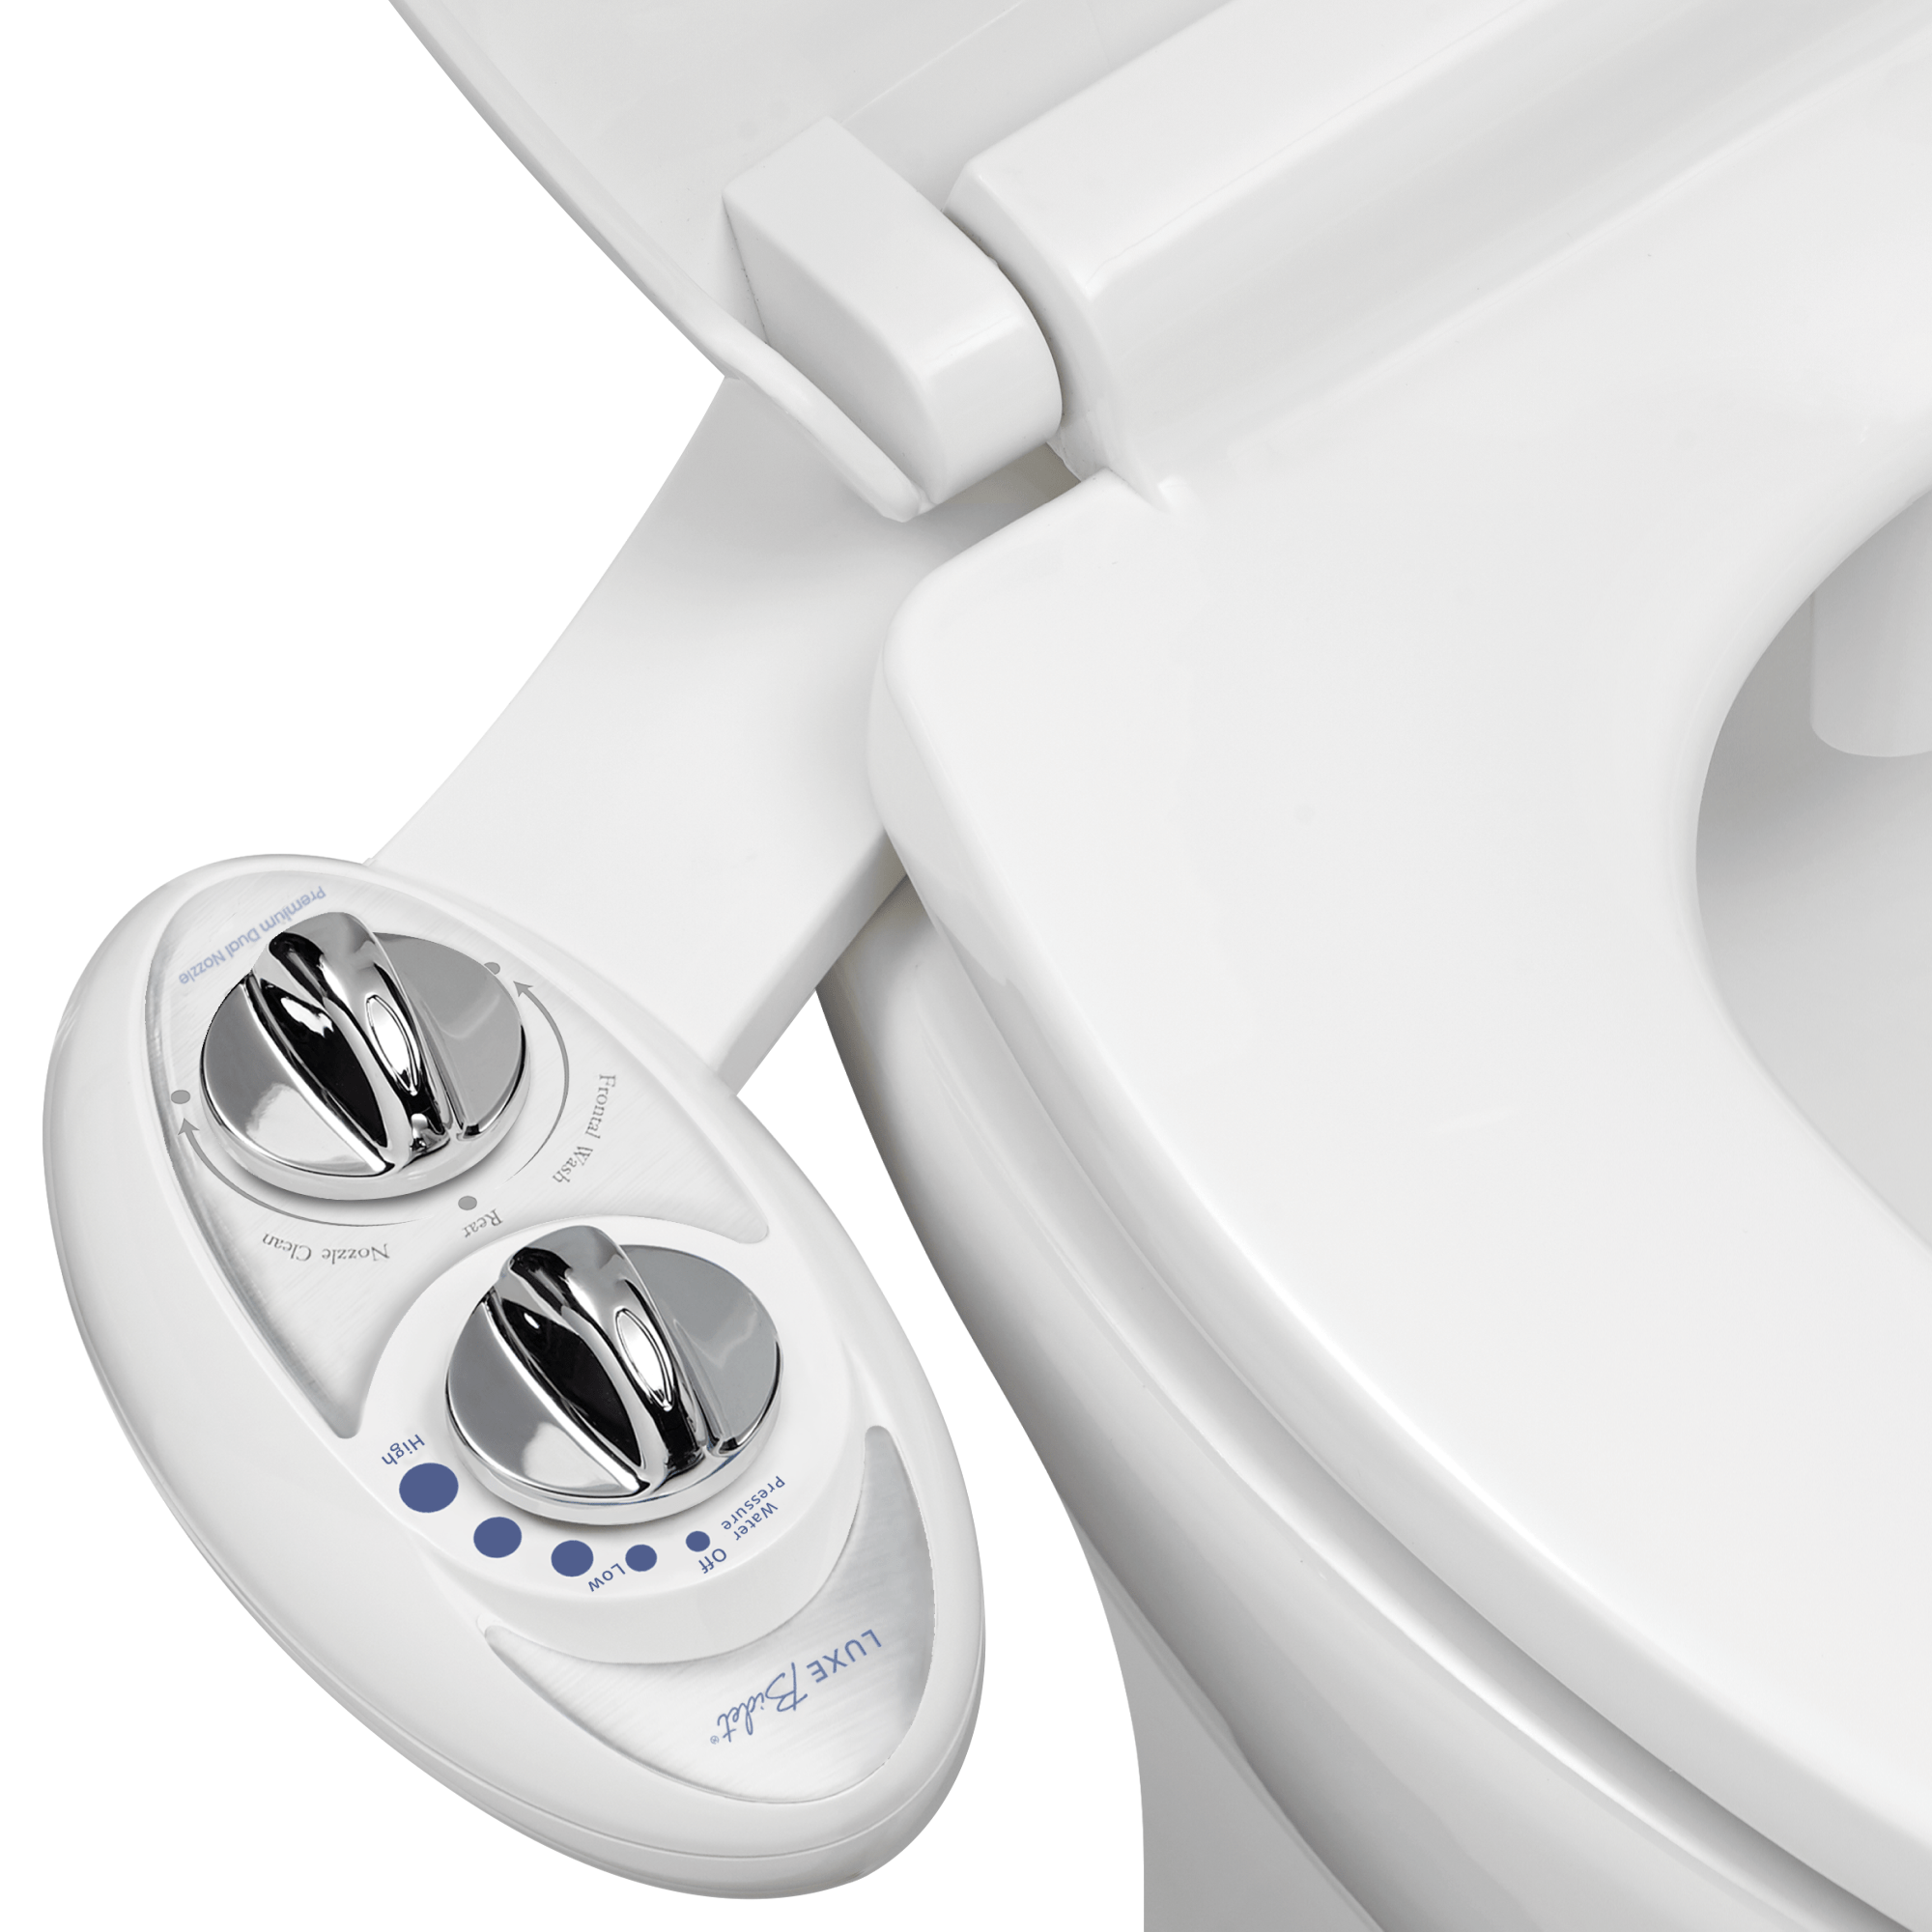 NEO 185: Imperfect Packaging - NEO 185 W85 Pearl Gray installed on a toilet, open lid